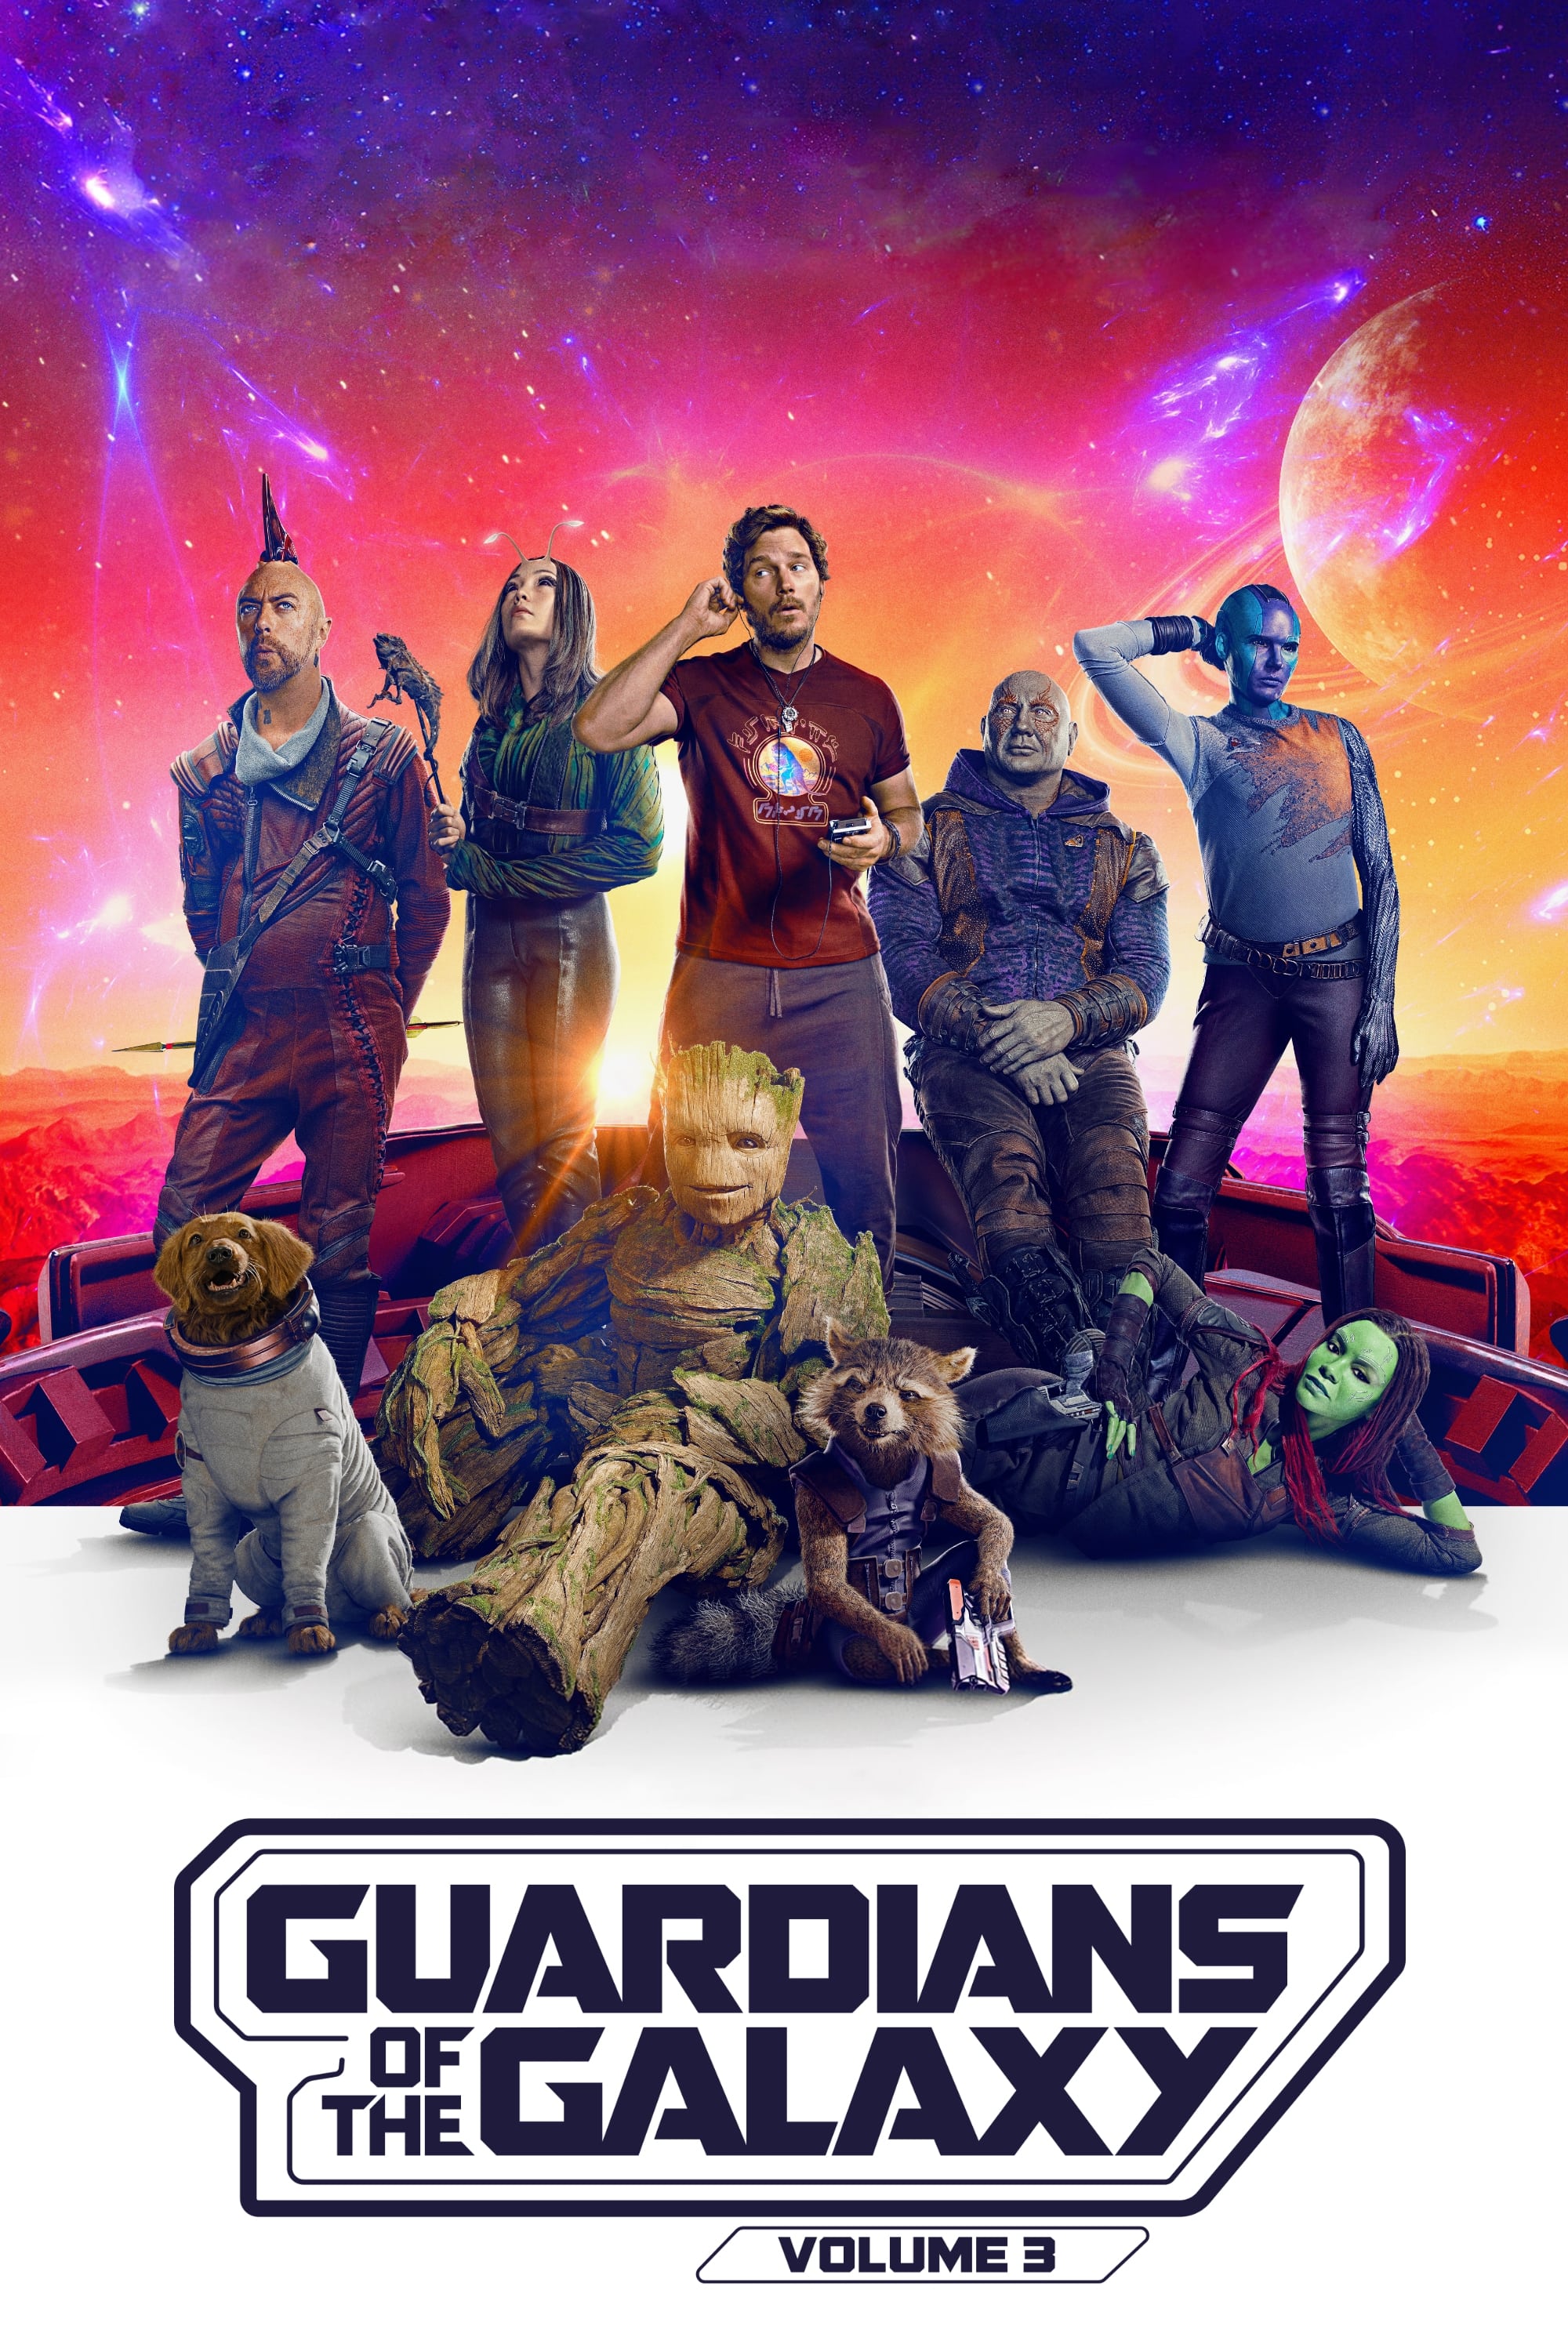 Guardians of the Galaxy Vol. 3 | نگهبانان کهکشان 3